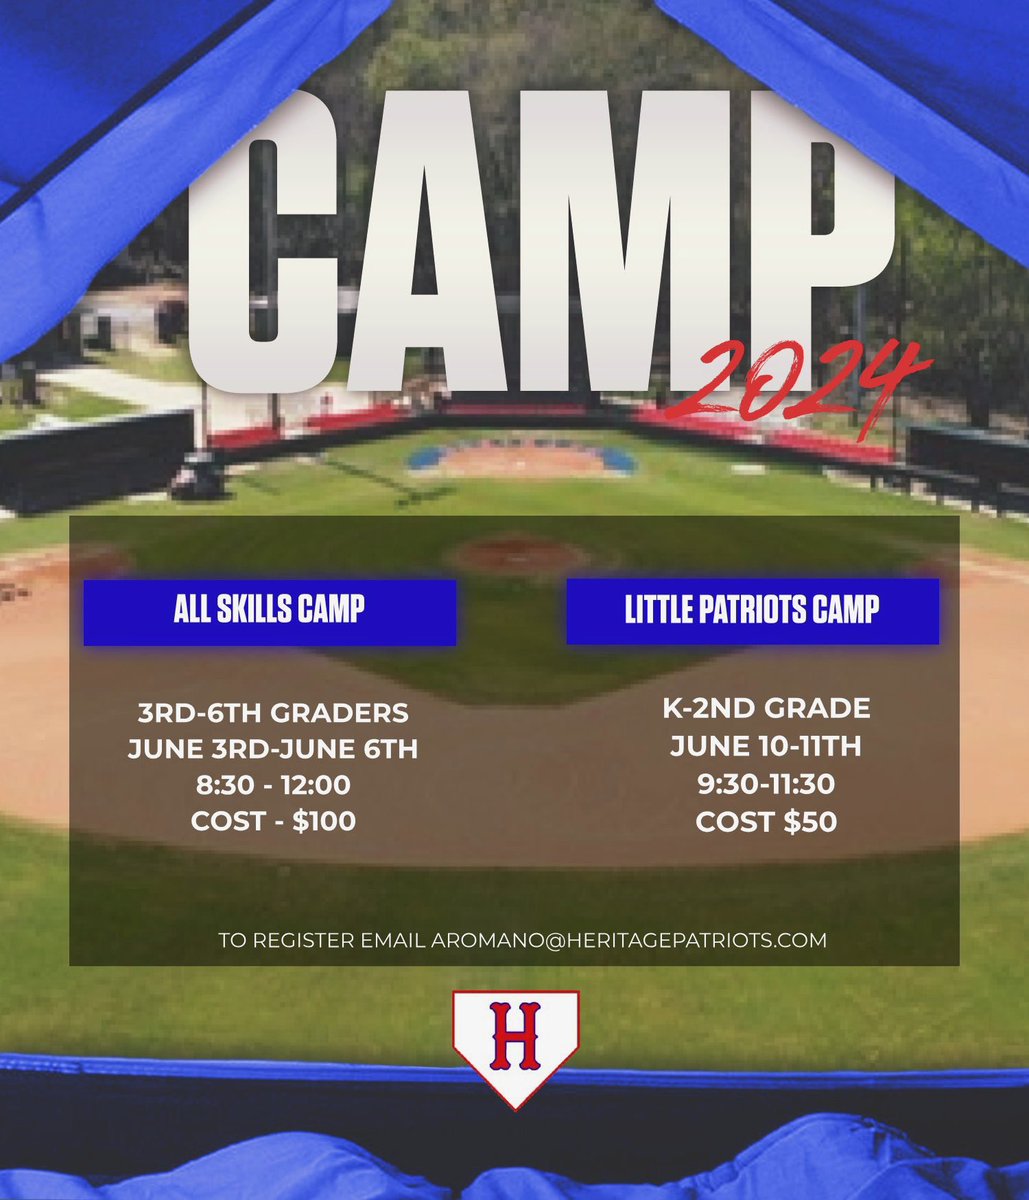 Join us for camp this summer! Kids will get instruction from Heritage coaches and players. Camp is always a fun learning experience for the young kids! Sign up today and don’t miss it! Email aromano@heritagepatriots.com to register!